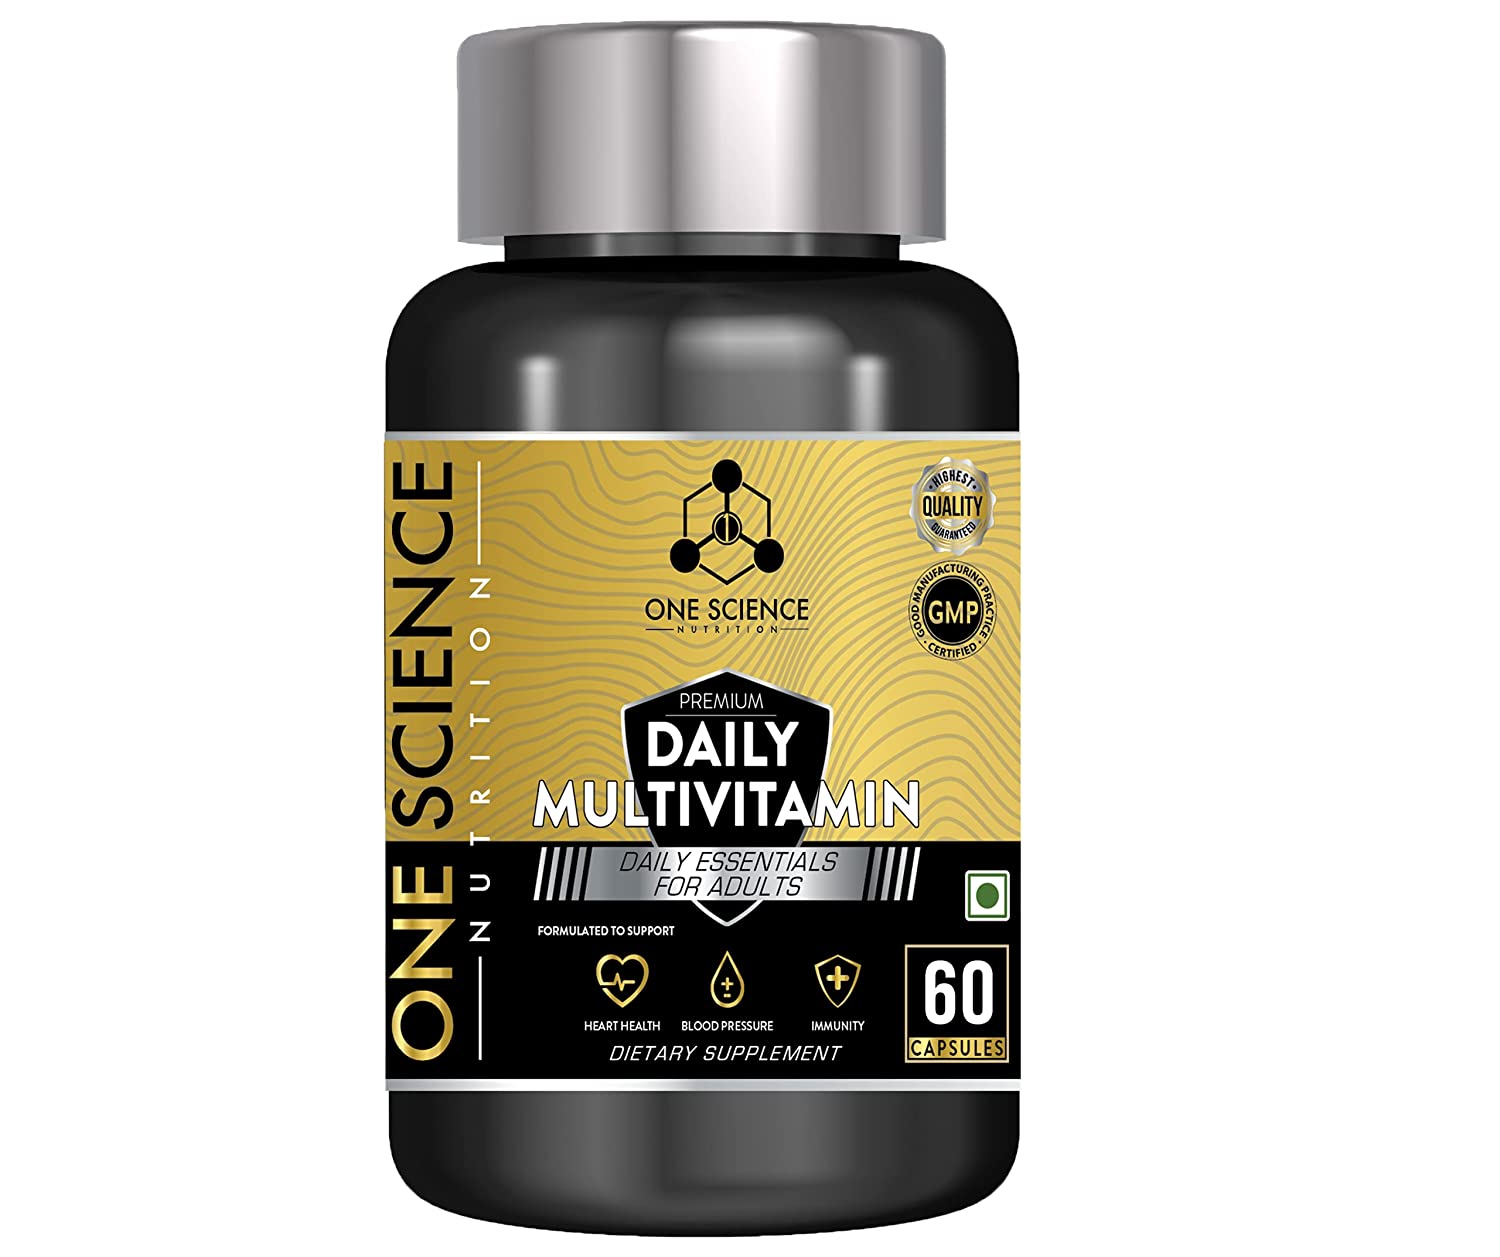 DAILY-MULTIVITAMIN-ONE-SCIENCE